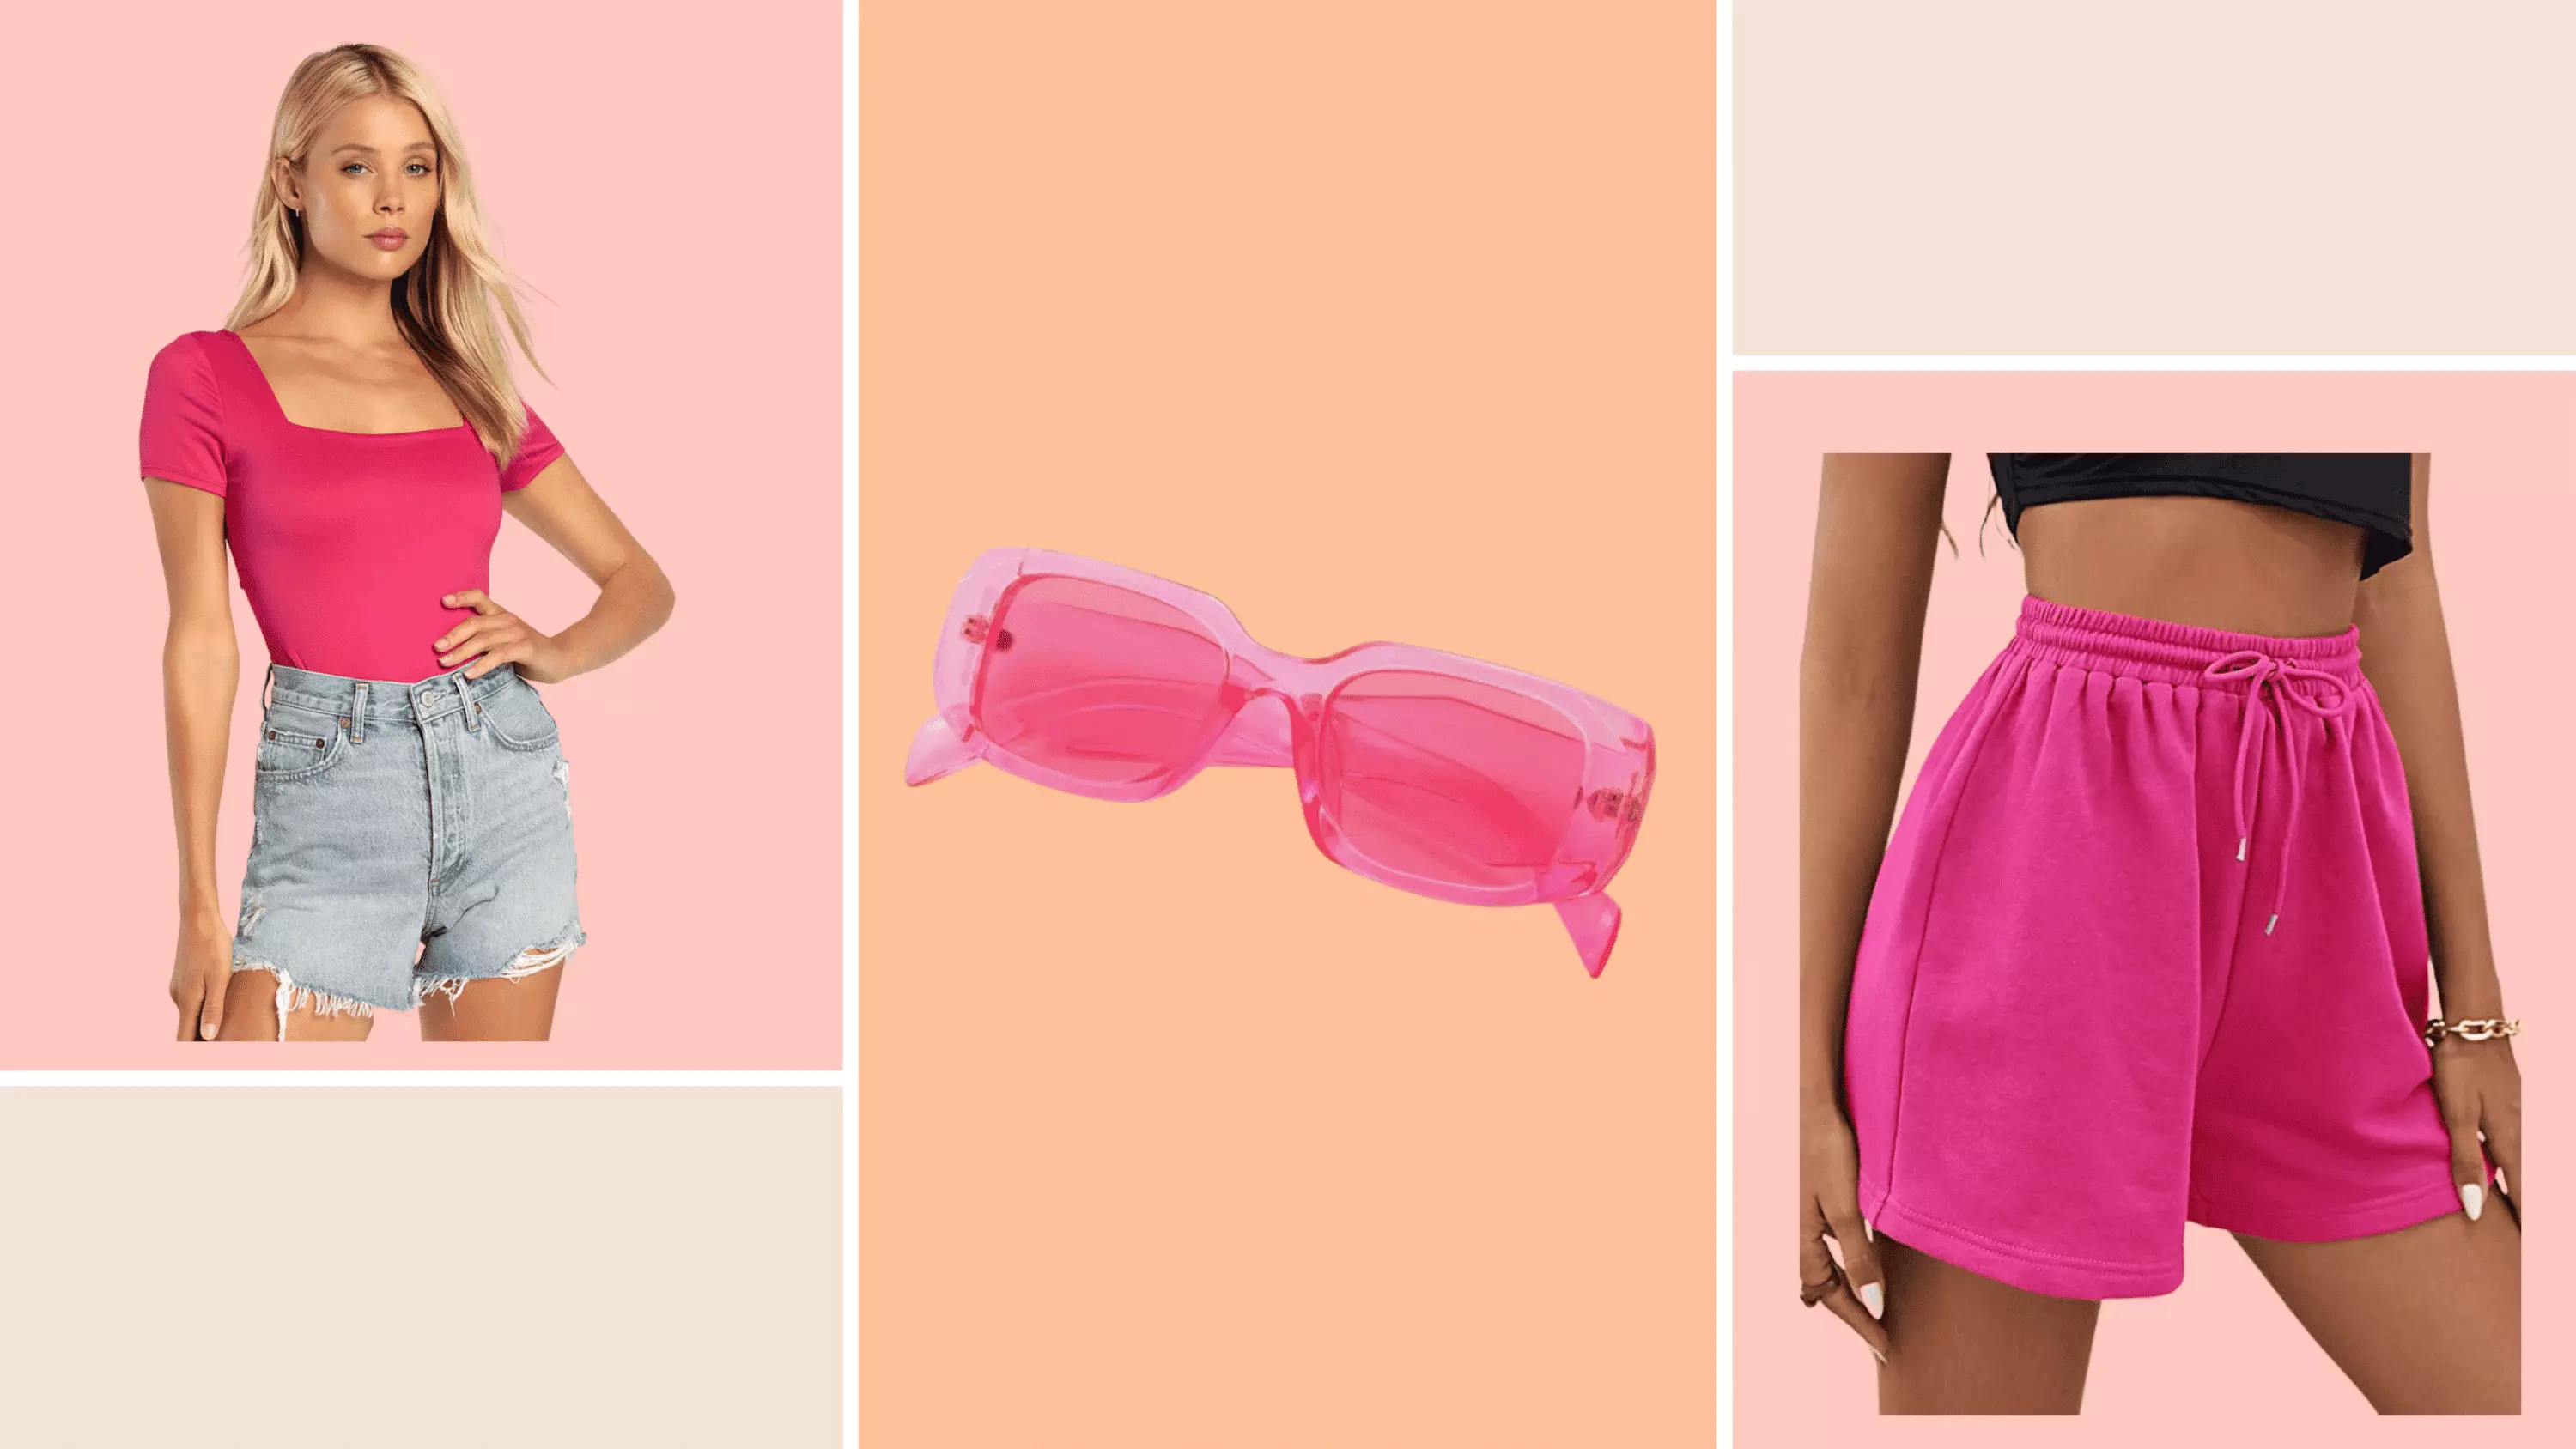 Pink is the new black thanks to the Barbiecore trend.